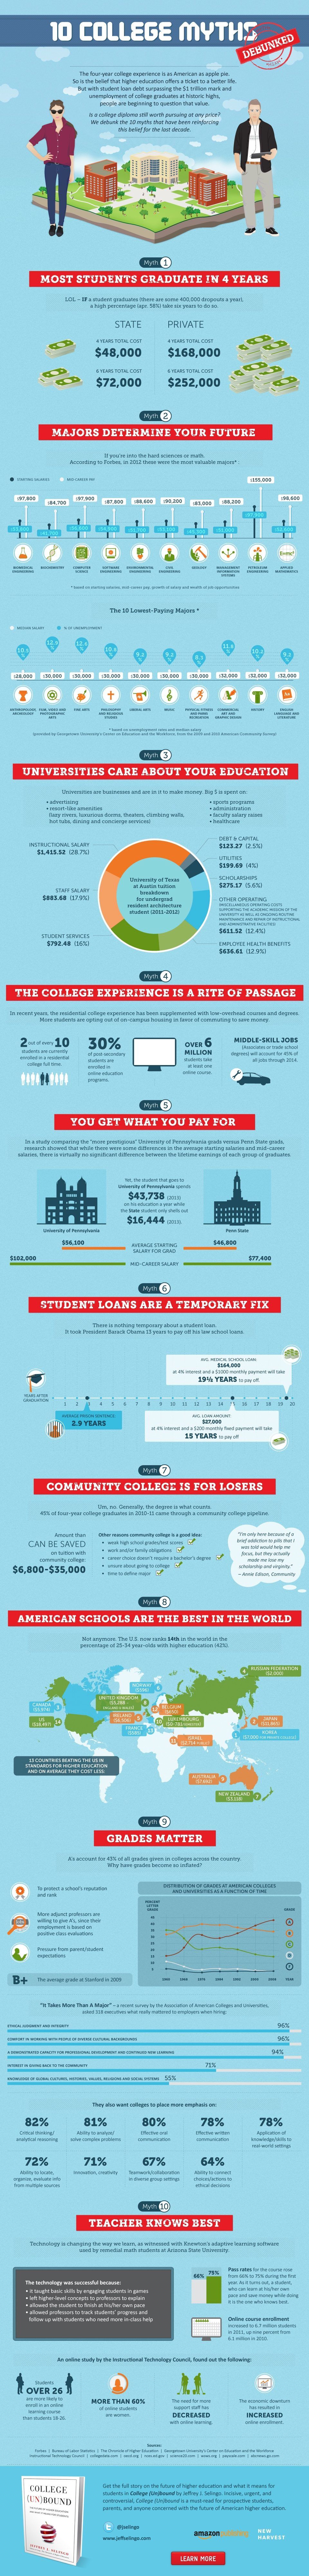 10 College Myths Debunked Infographic